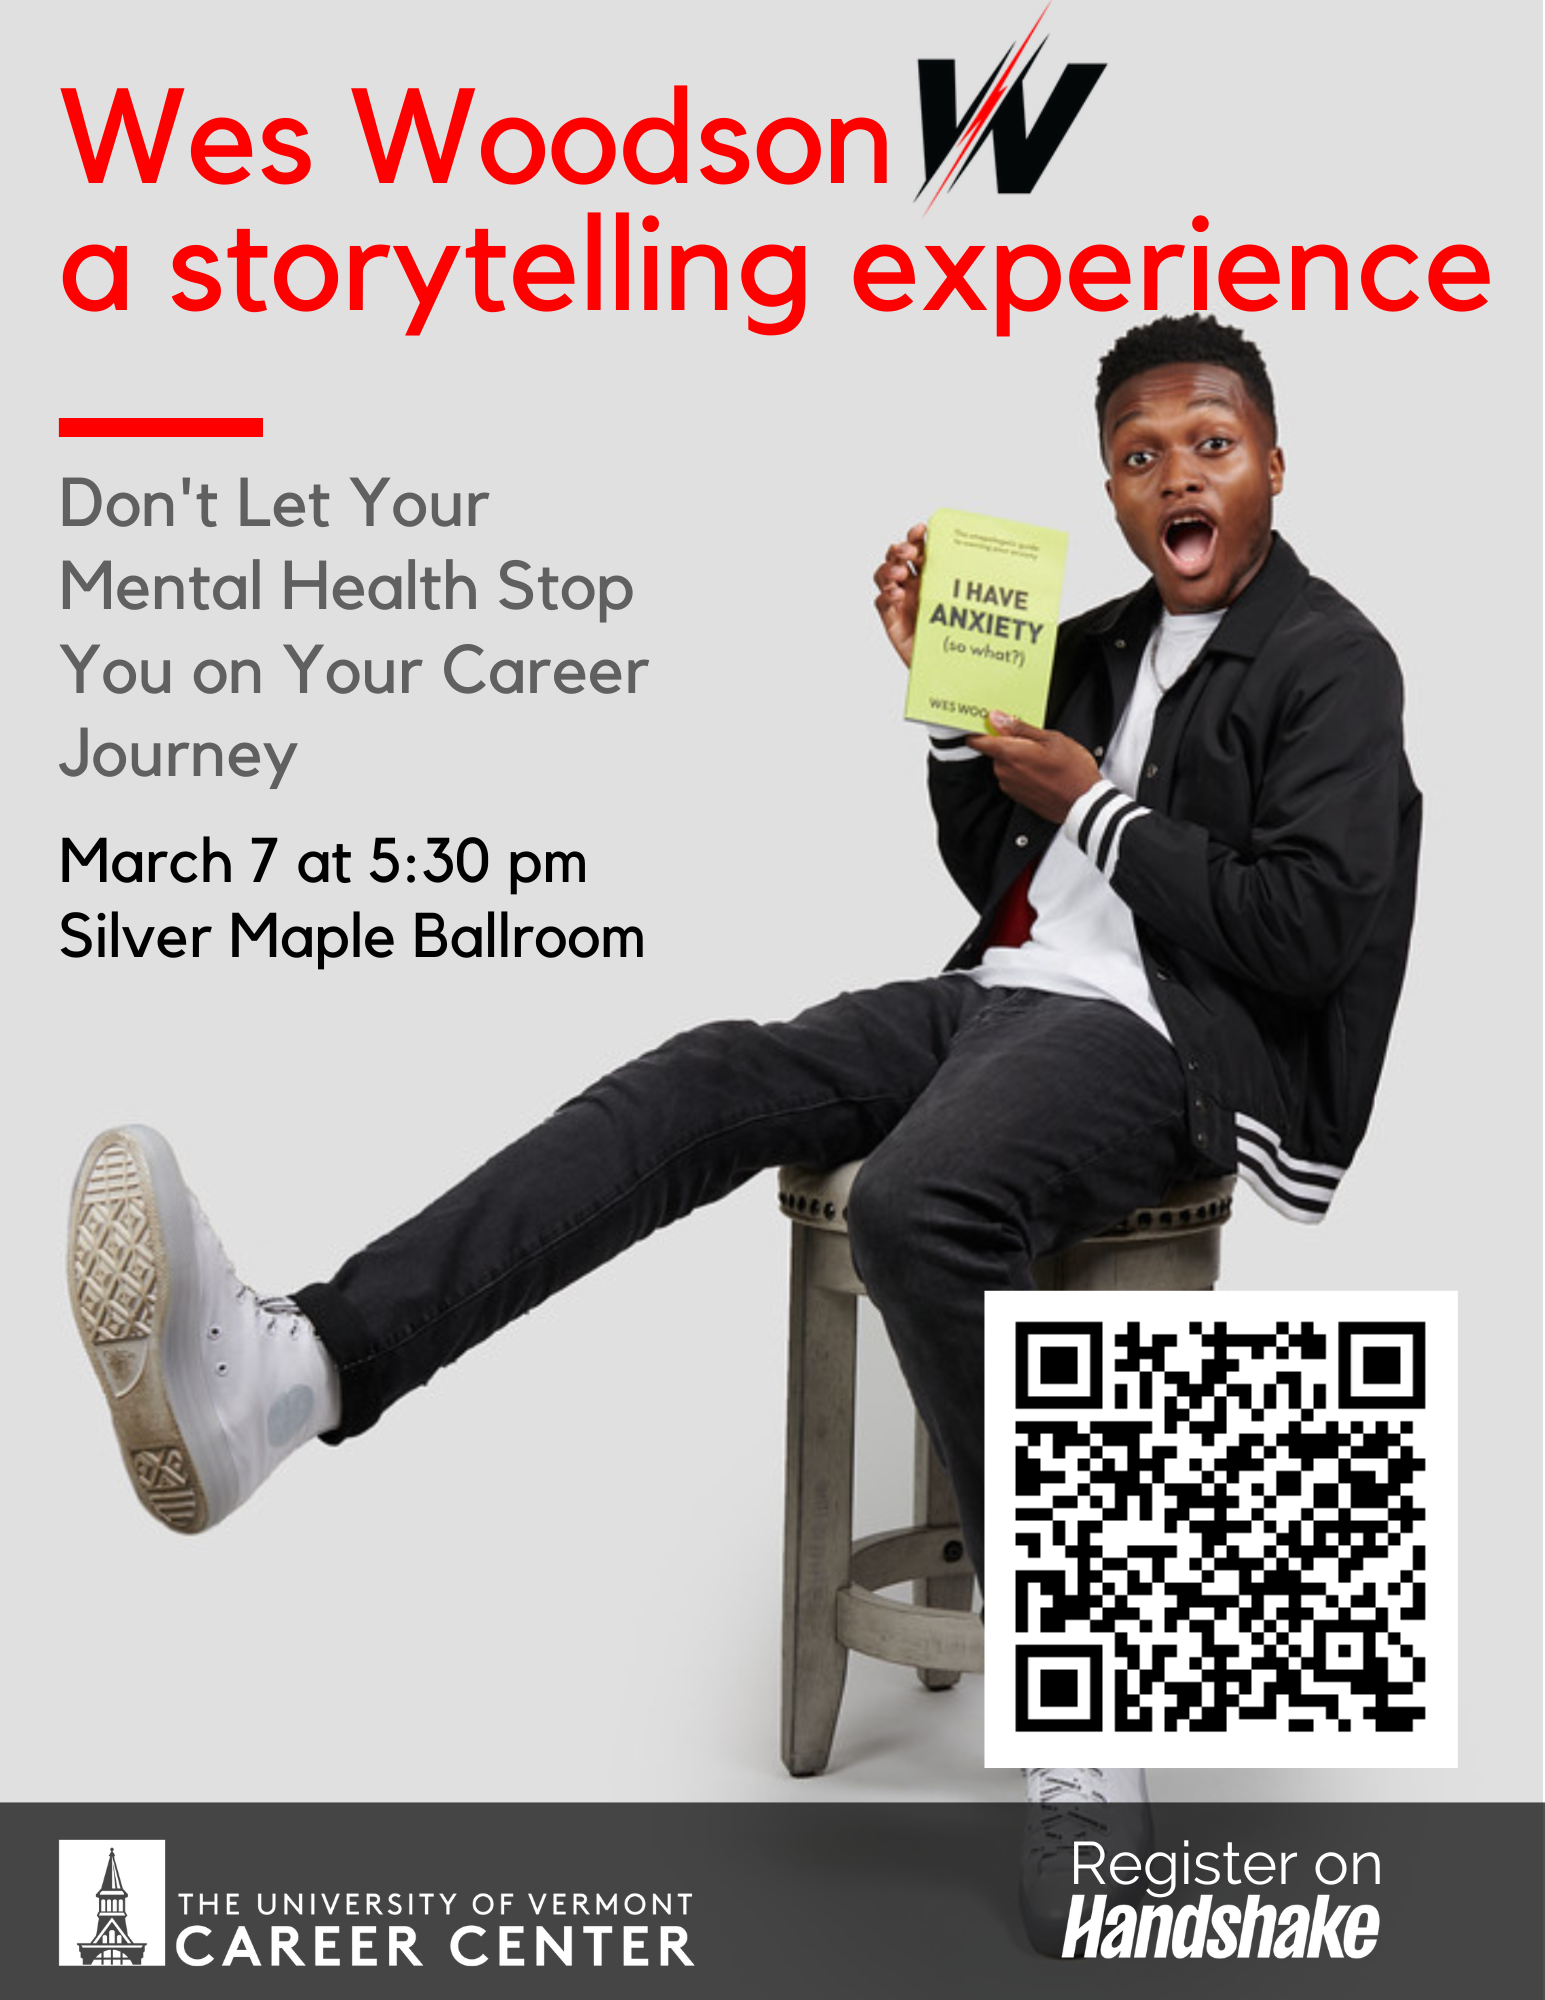 Poster for event titled "Wes Woodson, a story telling experience"